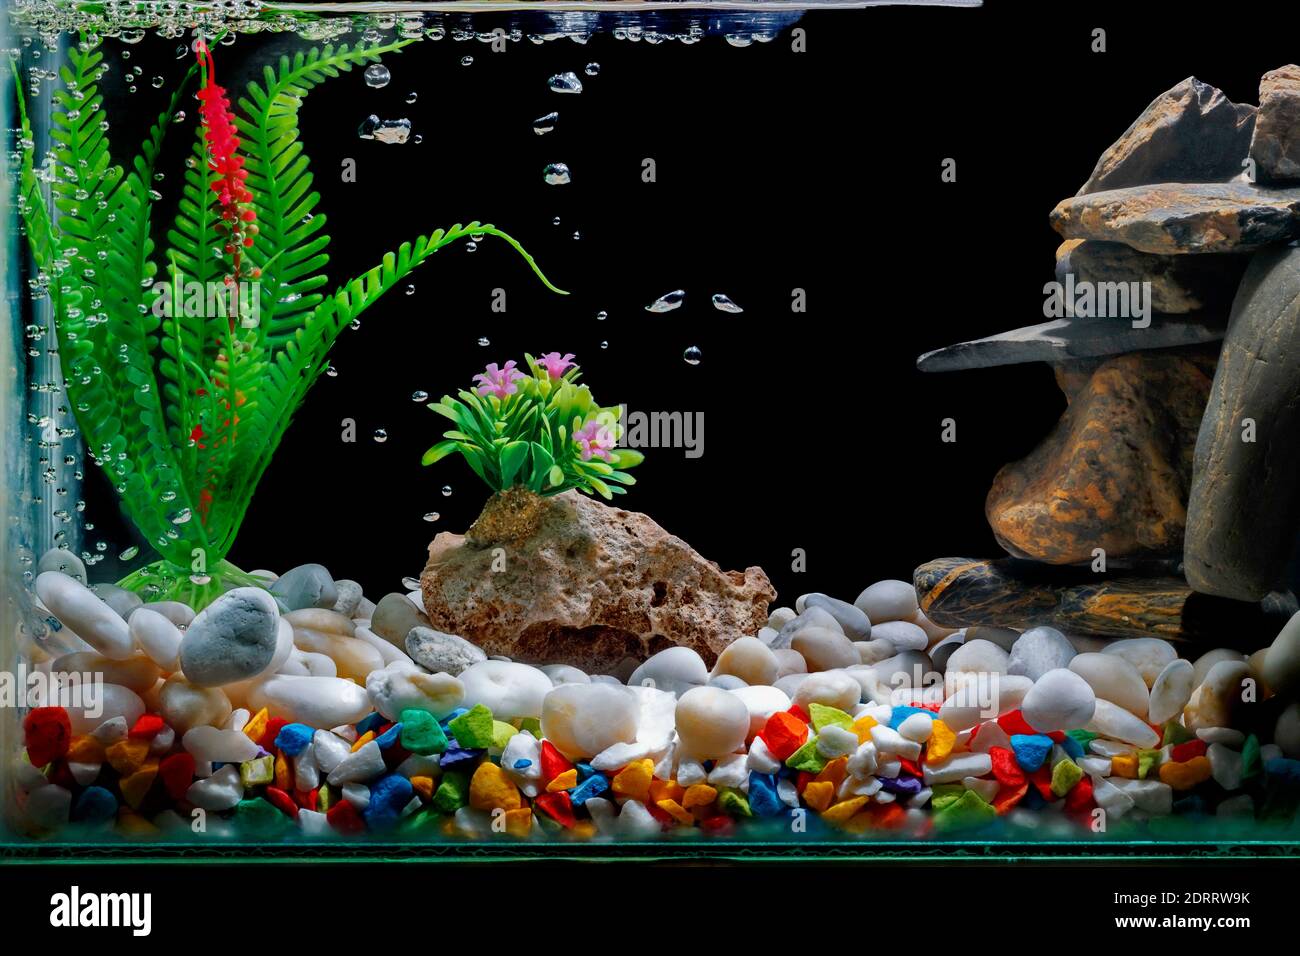 Fish Tank Decorations, With Gravel And Trees On A Black Backdrop Stock  Photo - Alamy